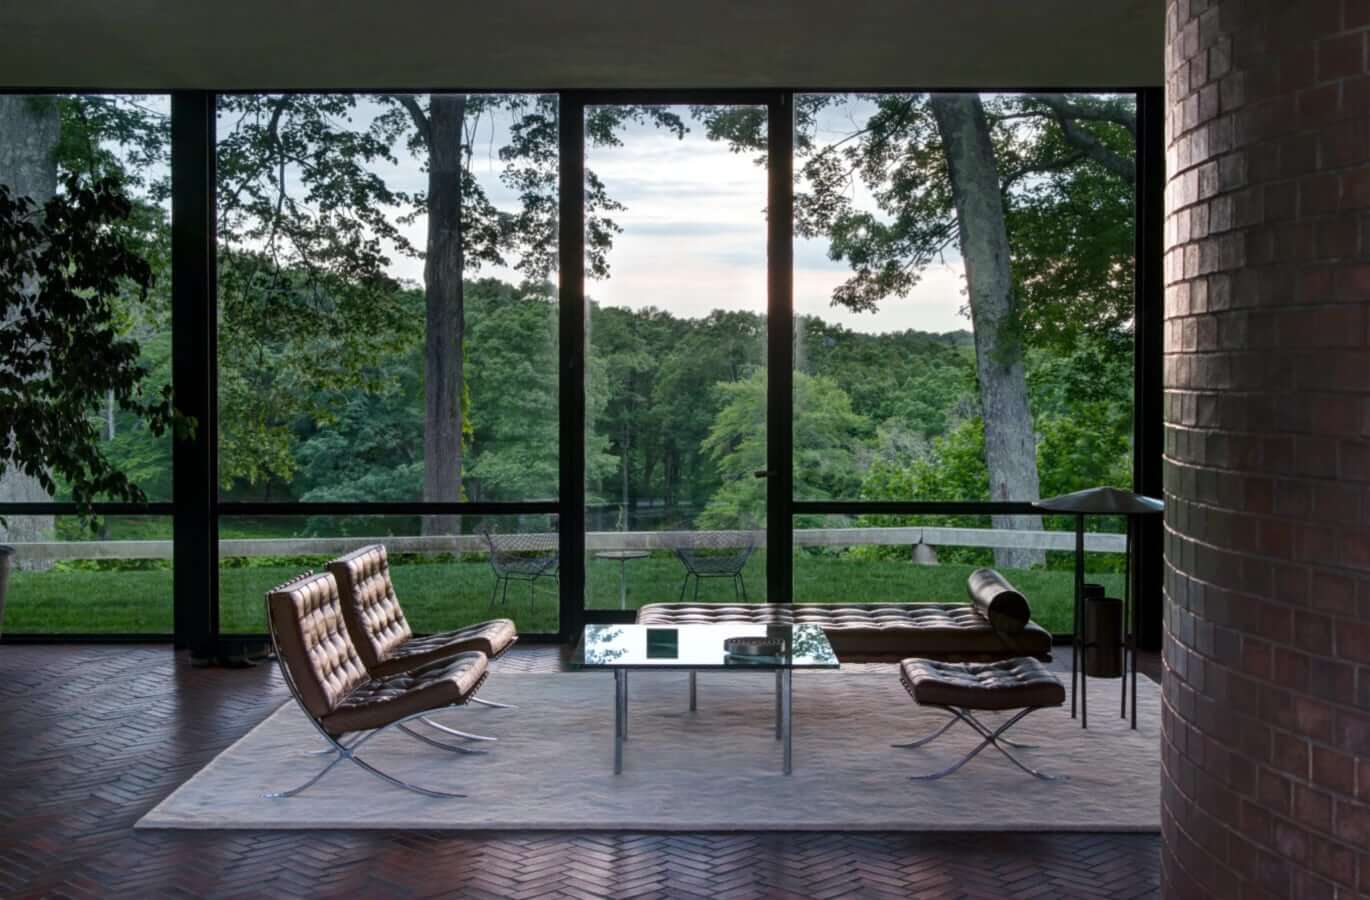 Barcelona daybed in Philip Johnson's Glass House